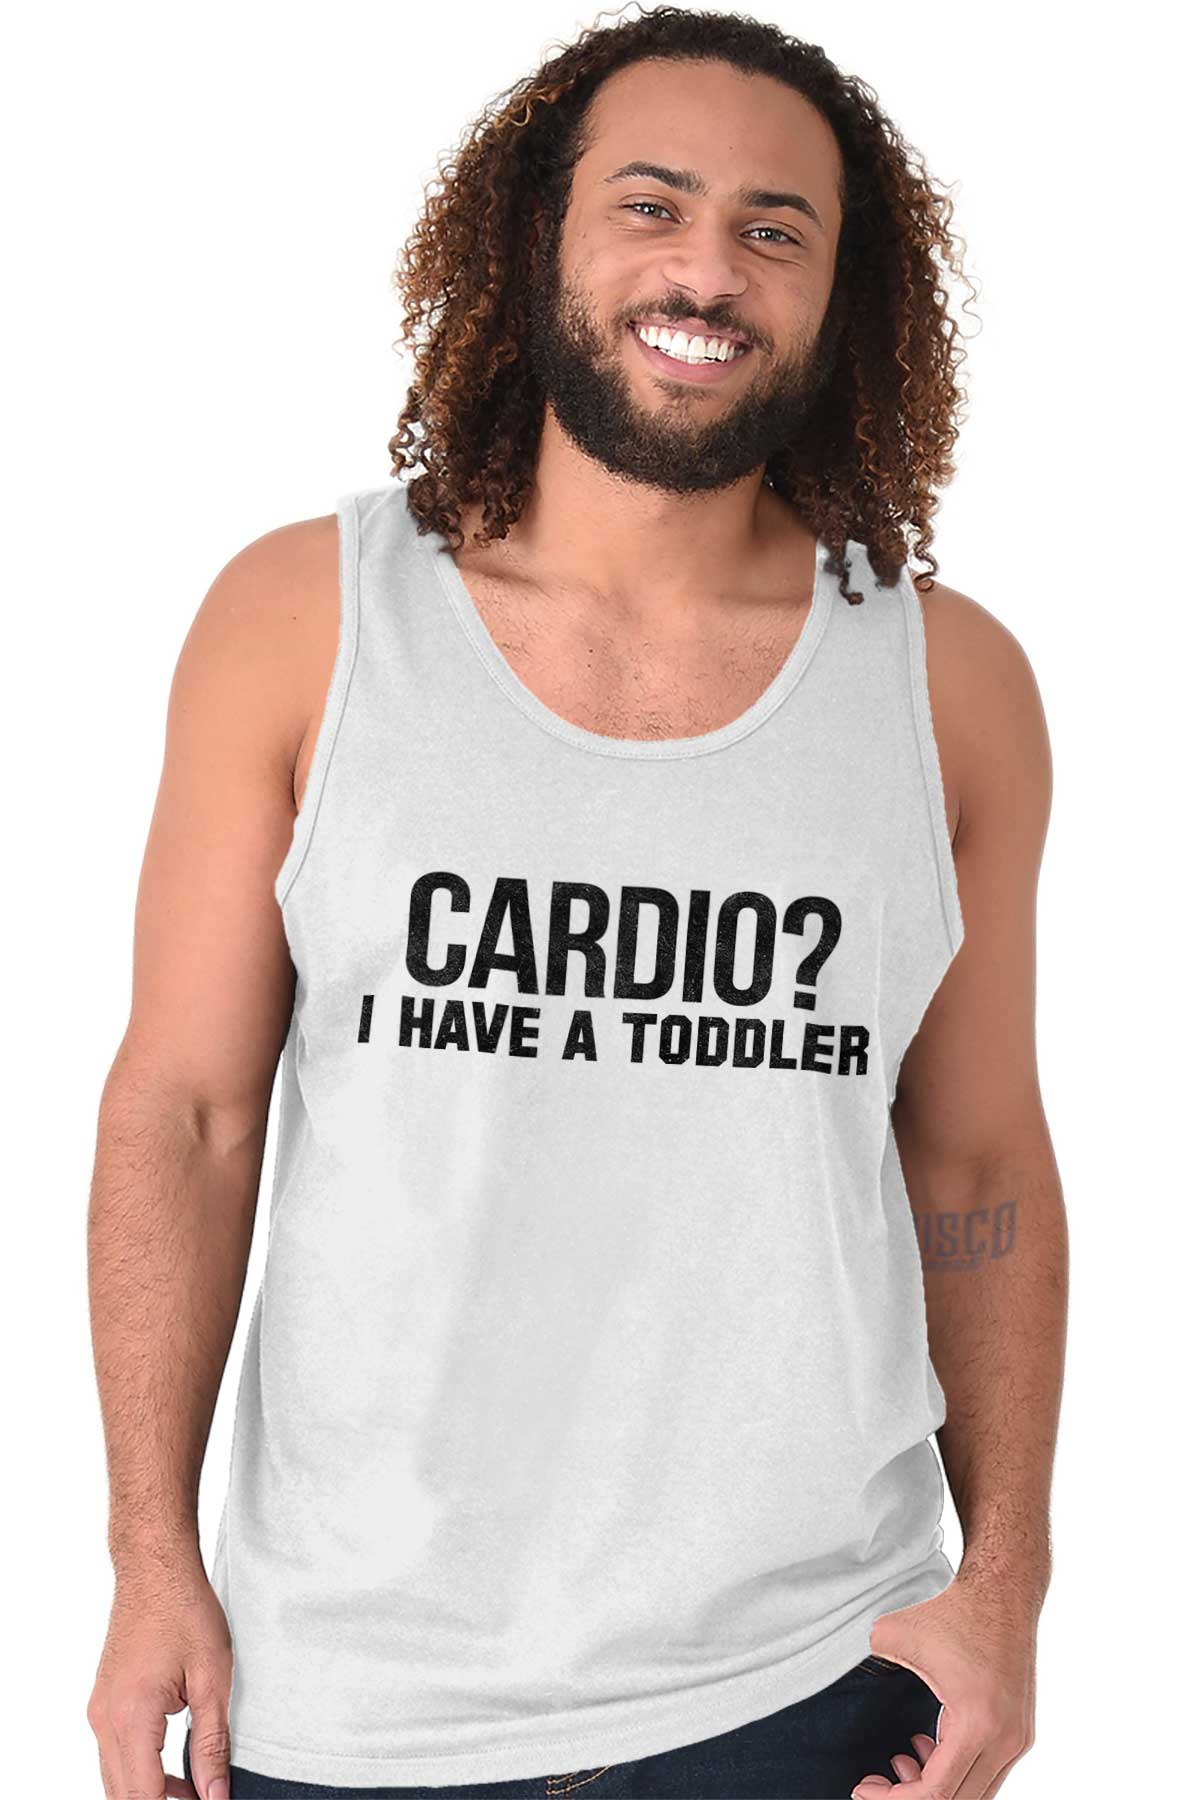 Cardio I Have a Toddler Funny Mom Gym Tank Top T Shirts Men Women Brisco Brands X - image 4 of 7